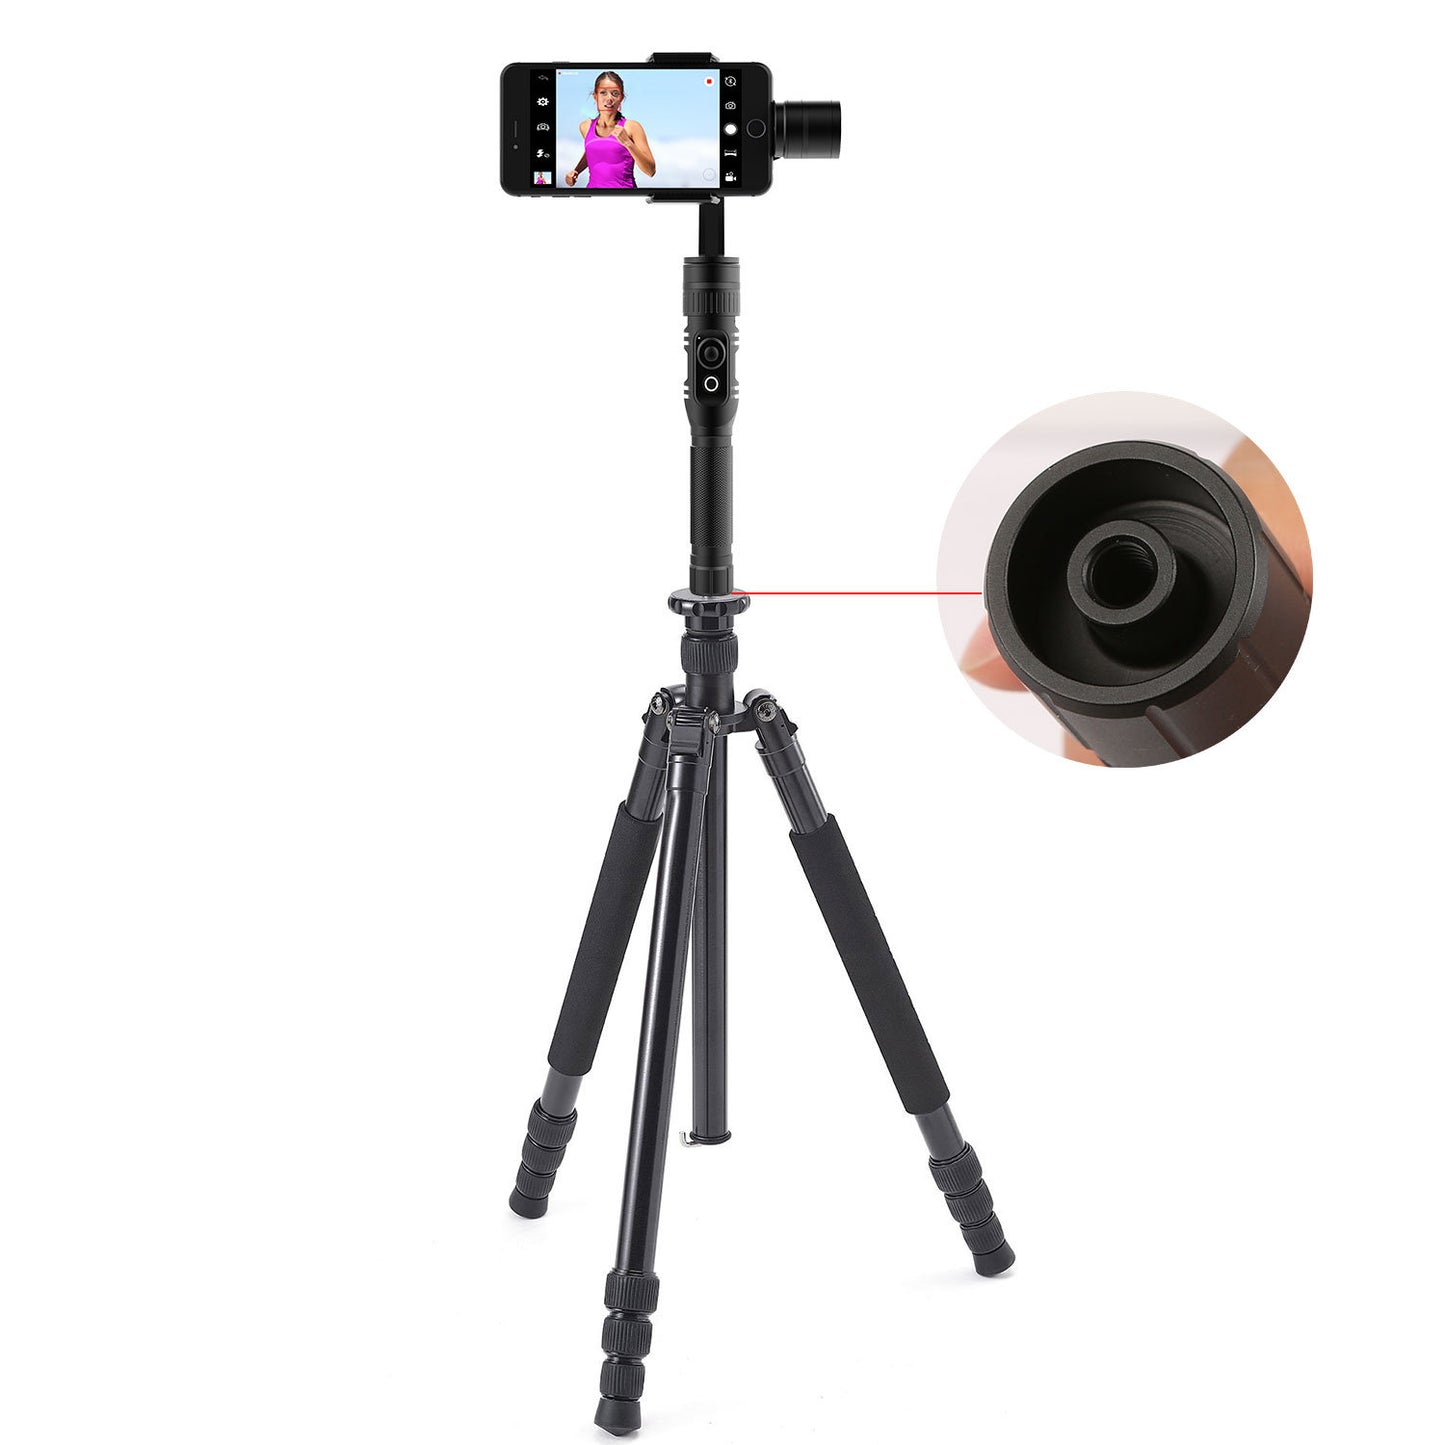 3-Axis Handheld Gimbal Stabilizer for Smartphones up to 6'